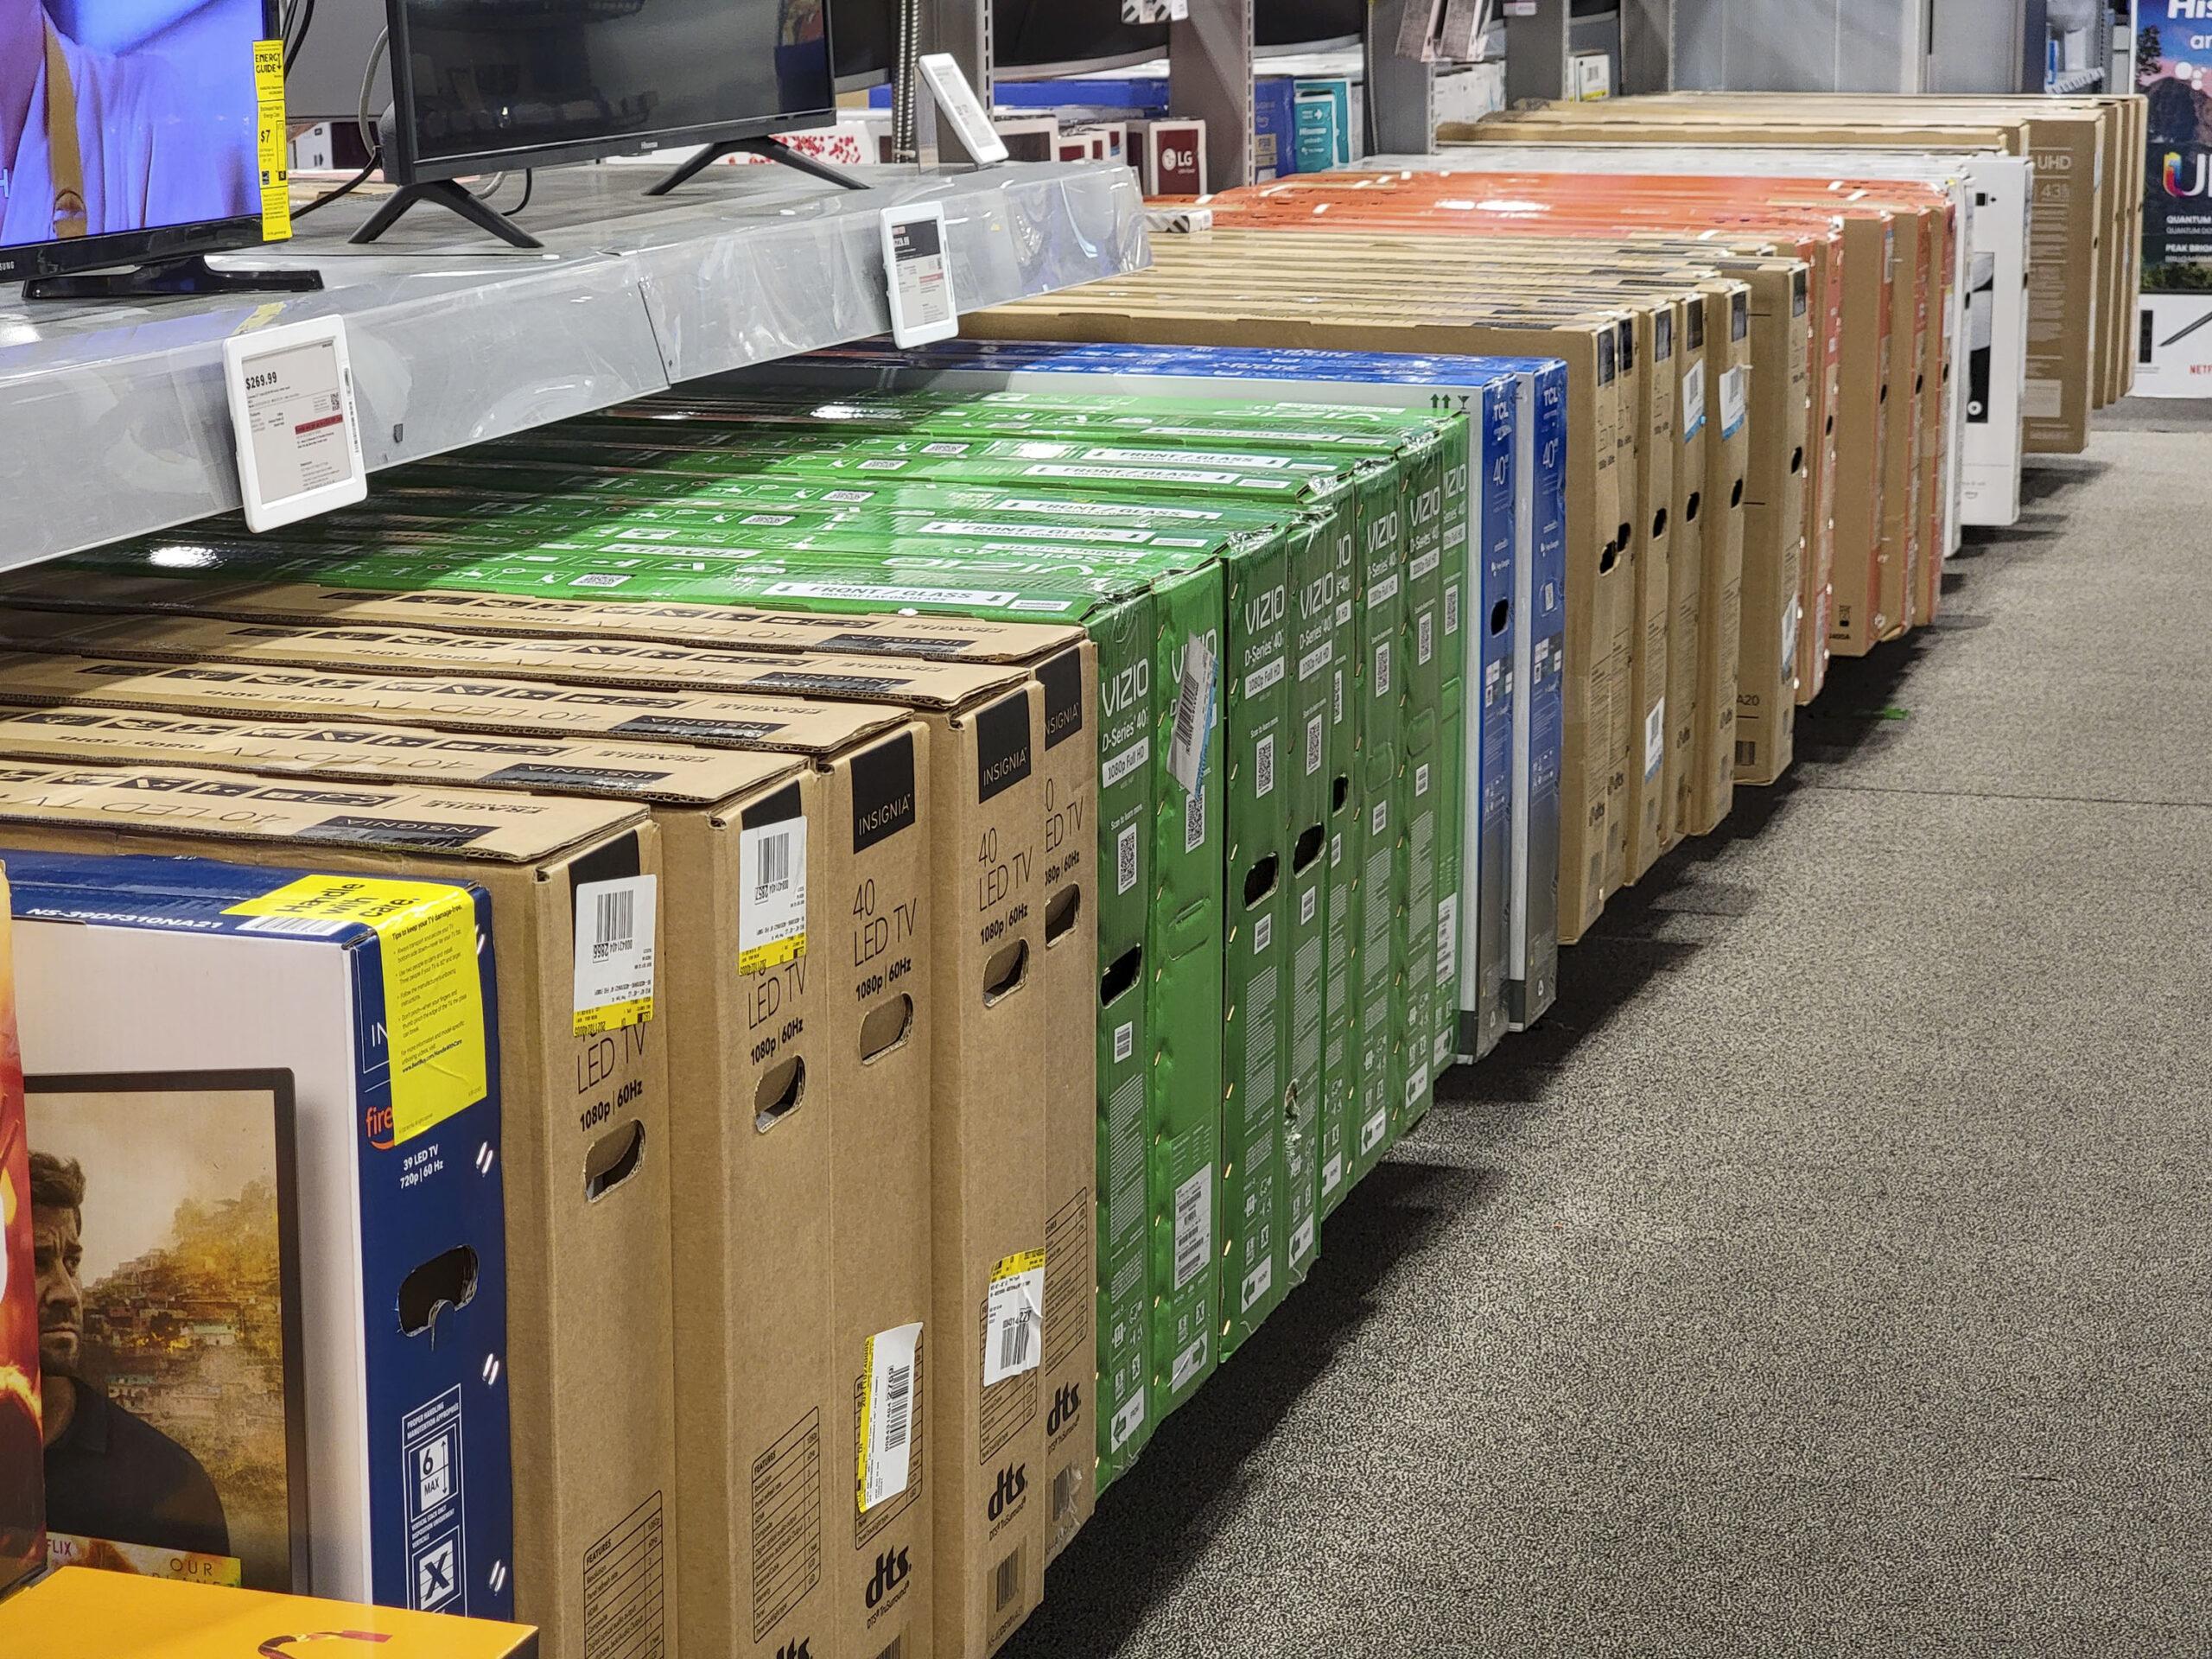 TV deals have long been a staple of Black Friday madness. But I've never seen so many pre-stocked TVs in one store. c90e2e9e 20211119 164340 scaled